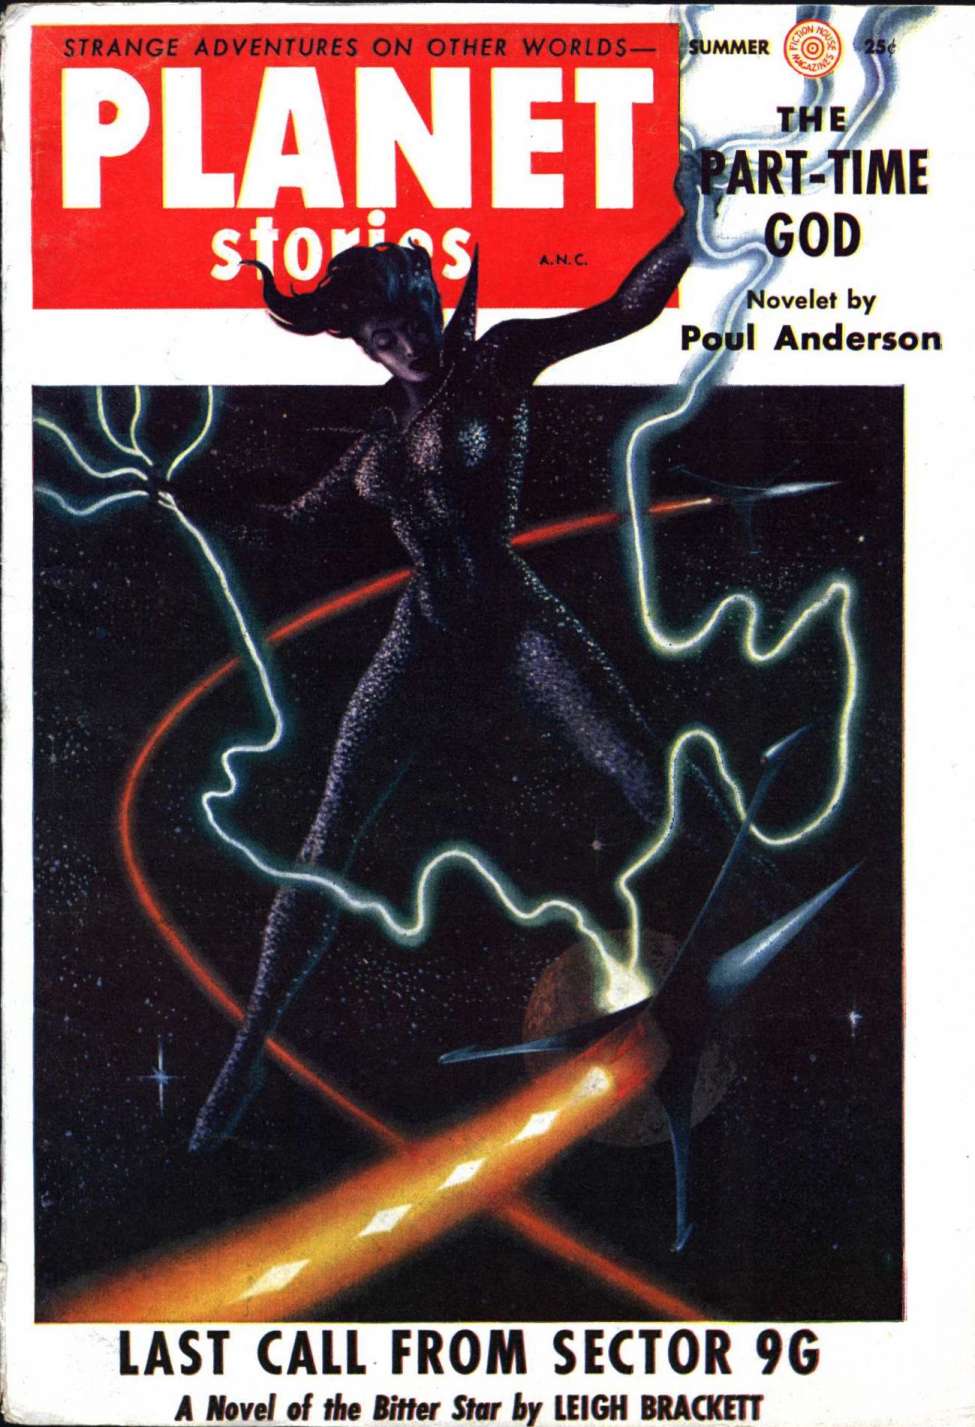 Comic Book Cover For Planet Stories v6 11 - Last Call from Sector 9G - Leigh Brackett